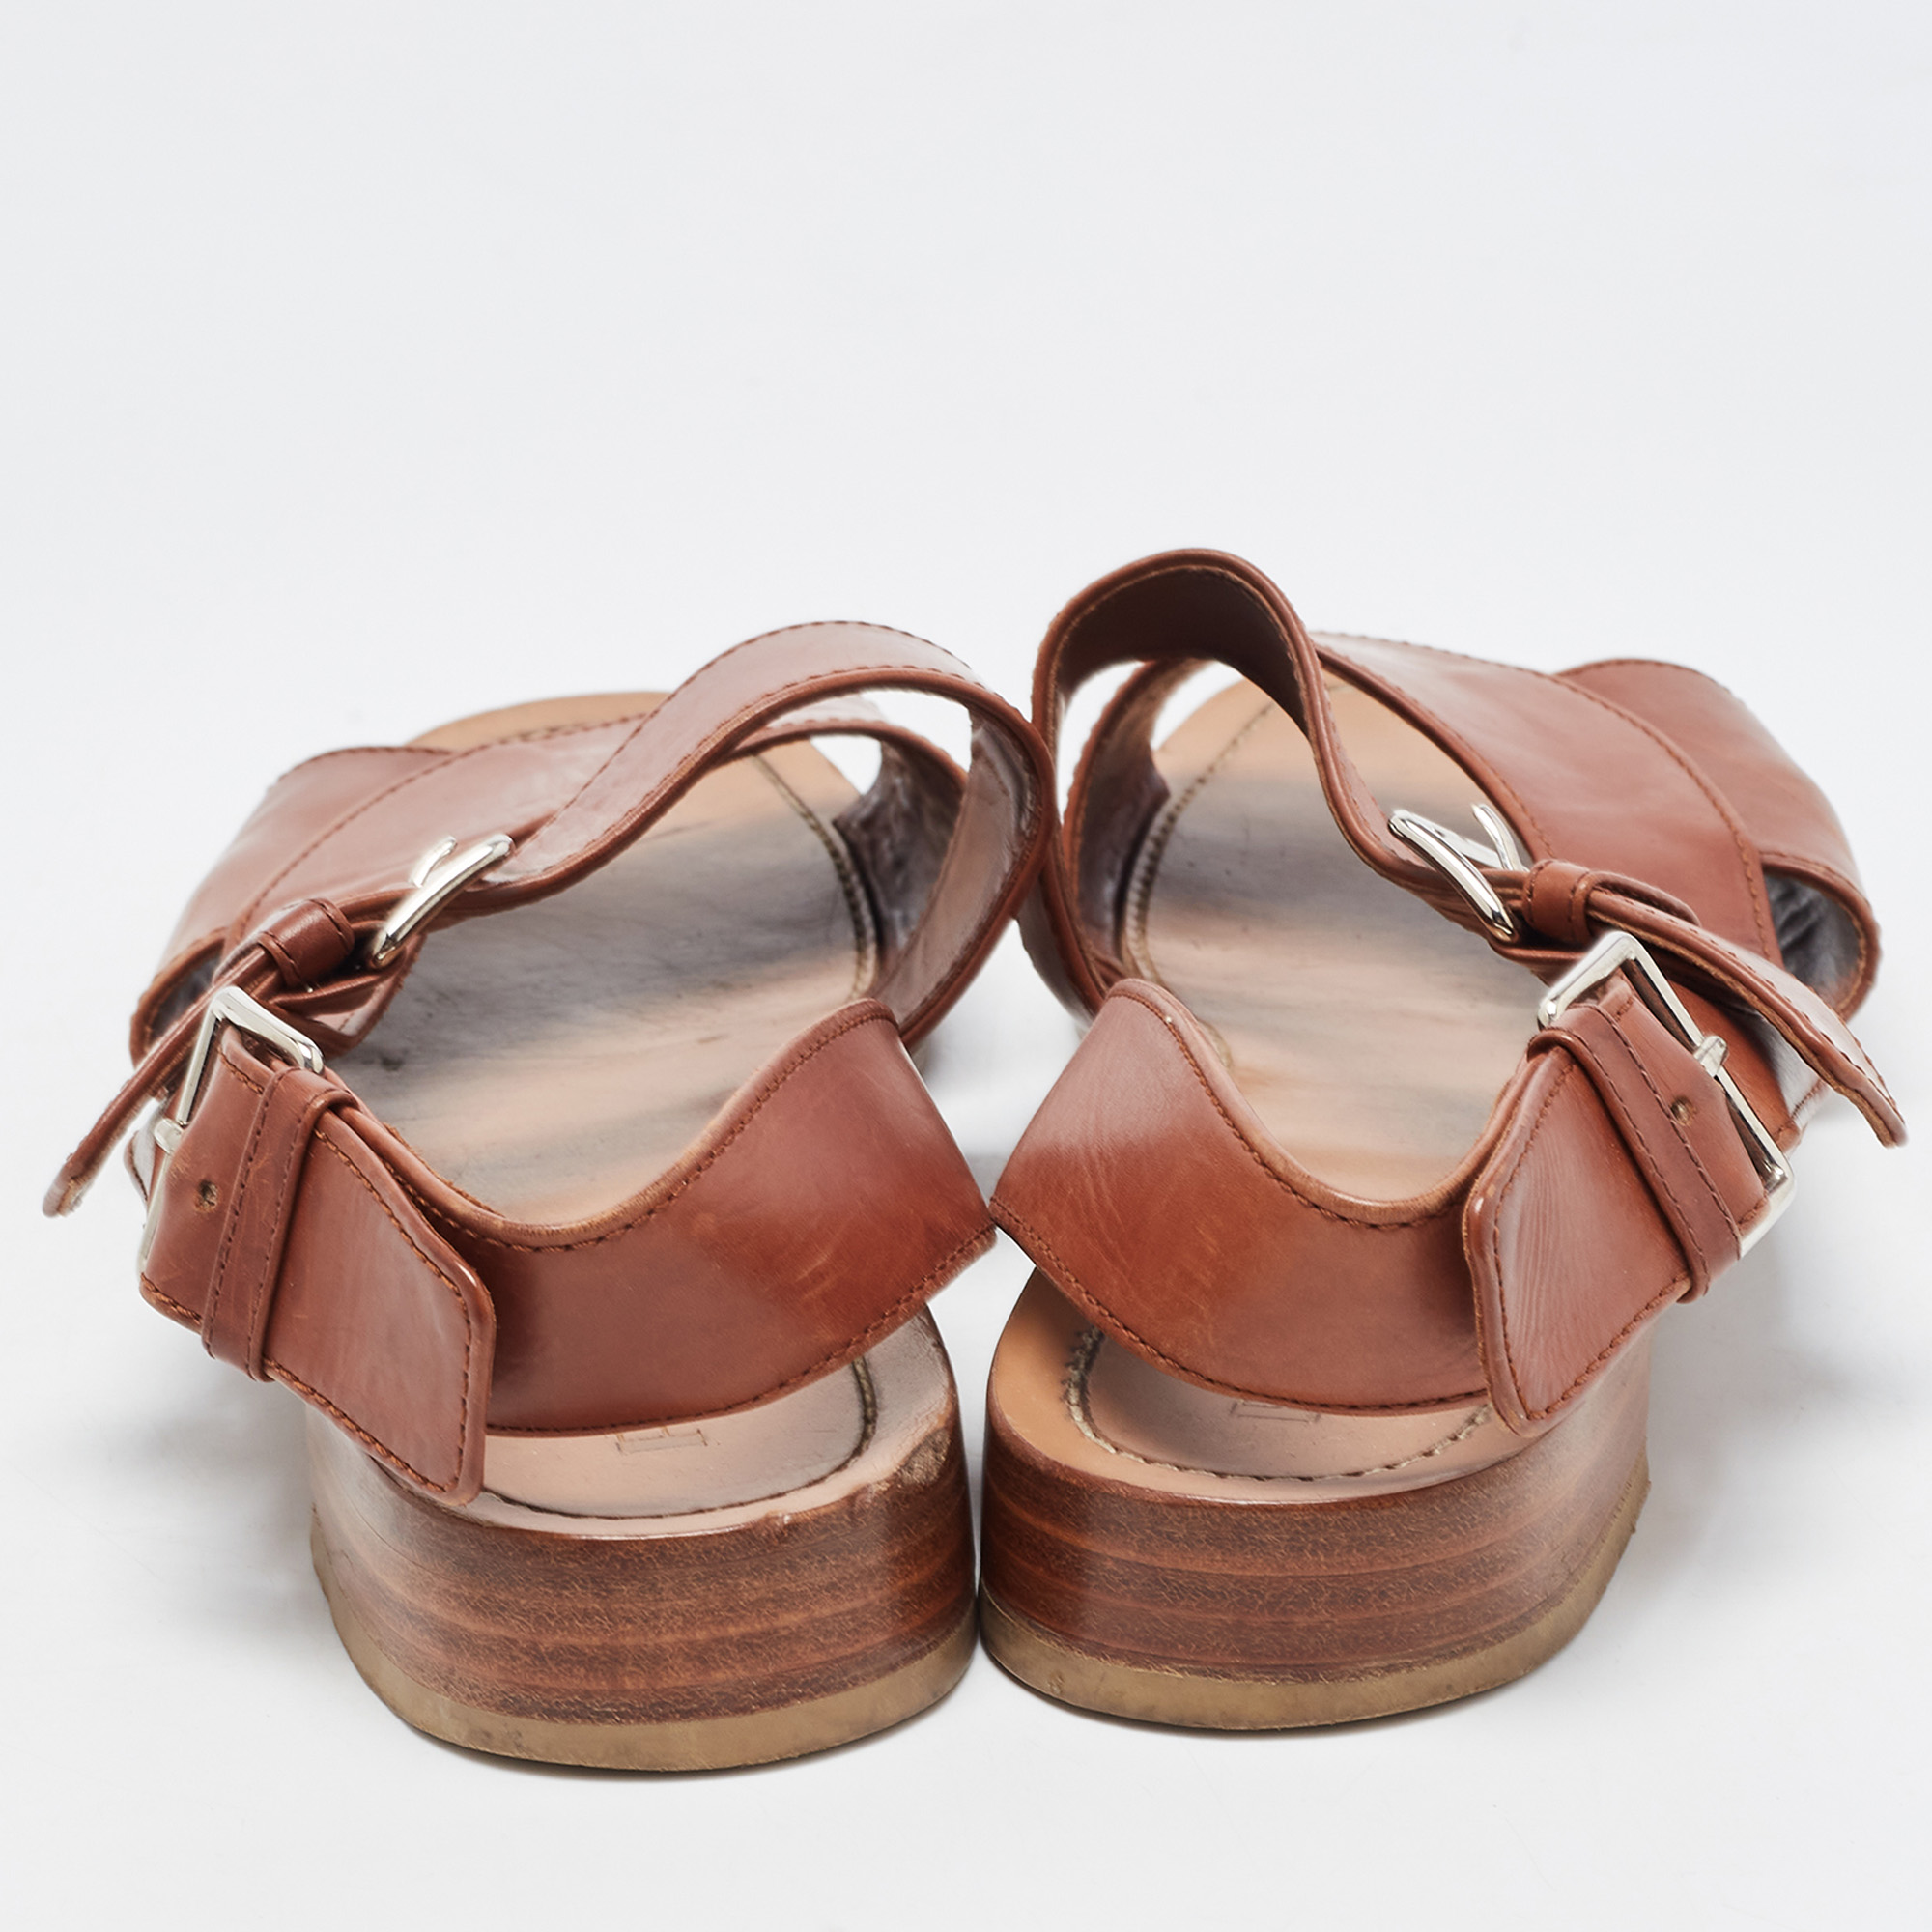 Prada Brown Leather Flat Strappy Sandals Size 38.5